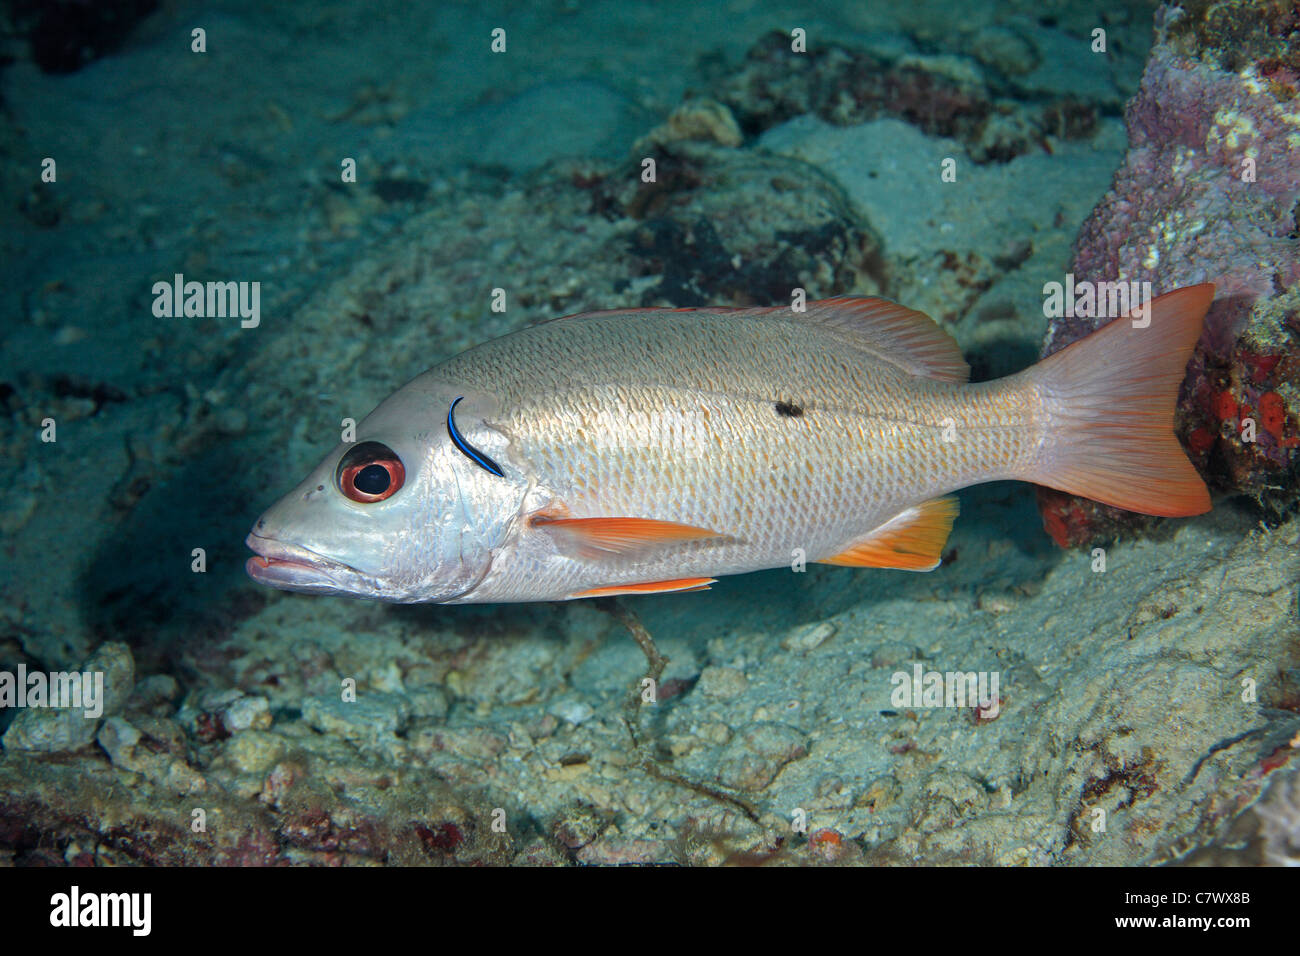 Onespot Snapper, also known as a Onespot Emperor, Lutjanus monostigma, being cleaned by a Bluestreak Cleaner Fish. Stock Photo